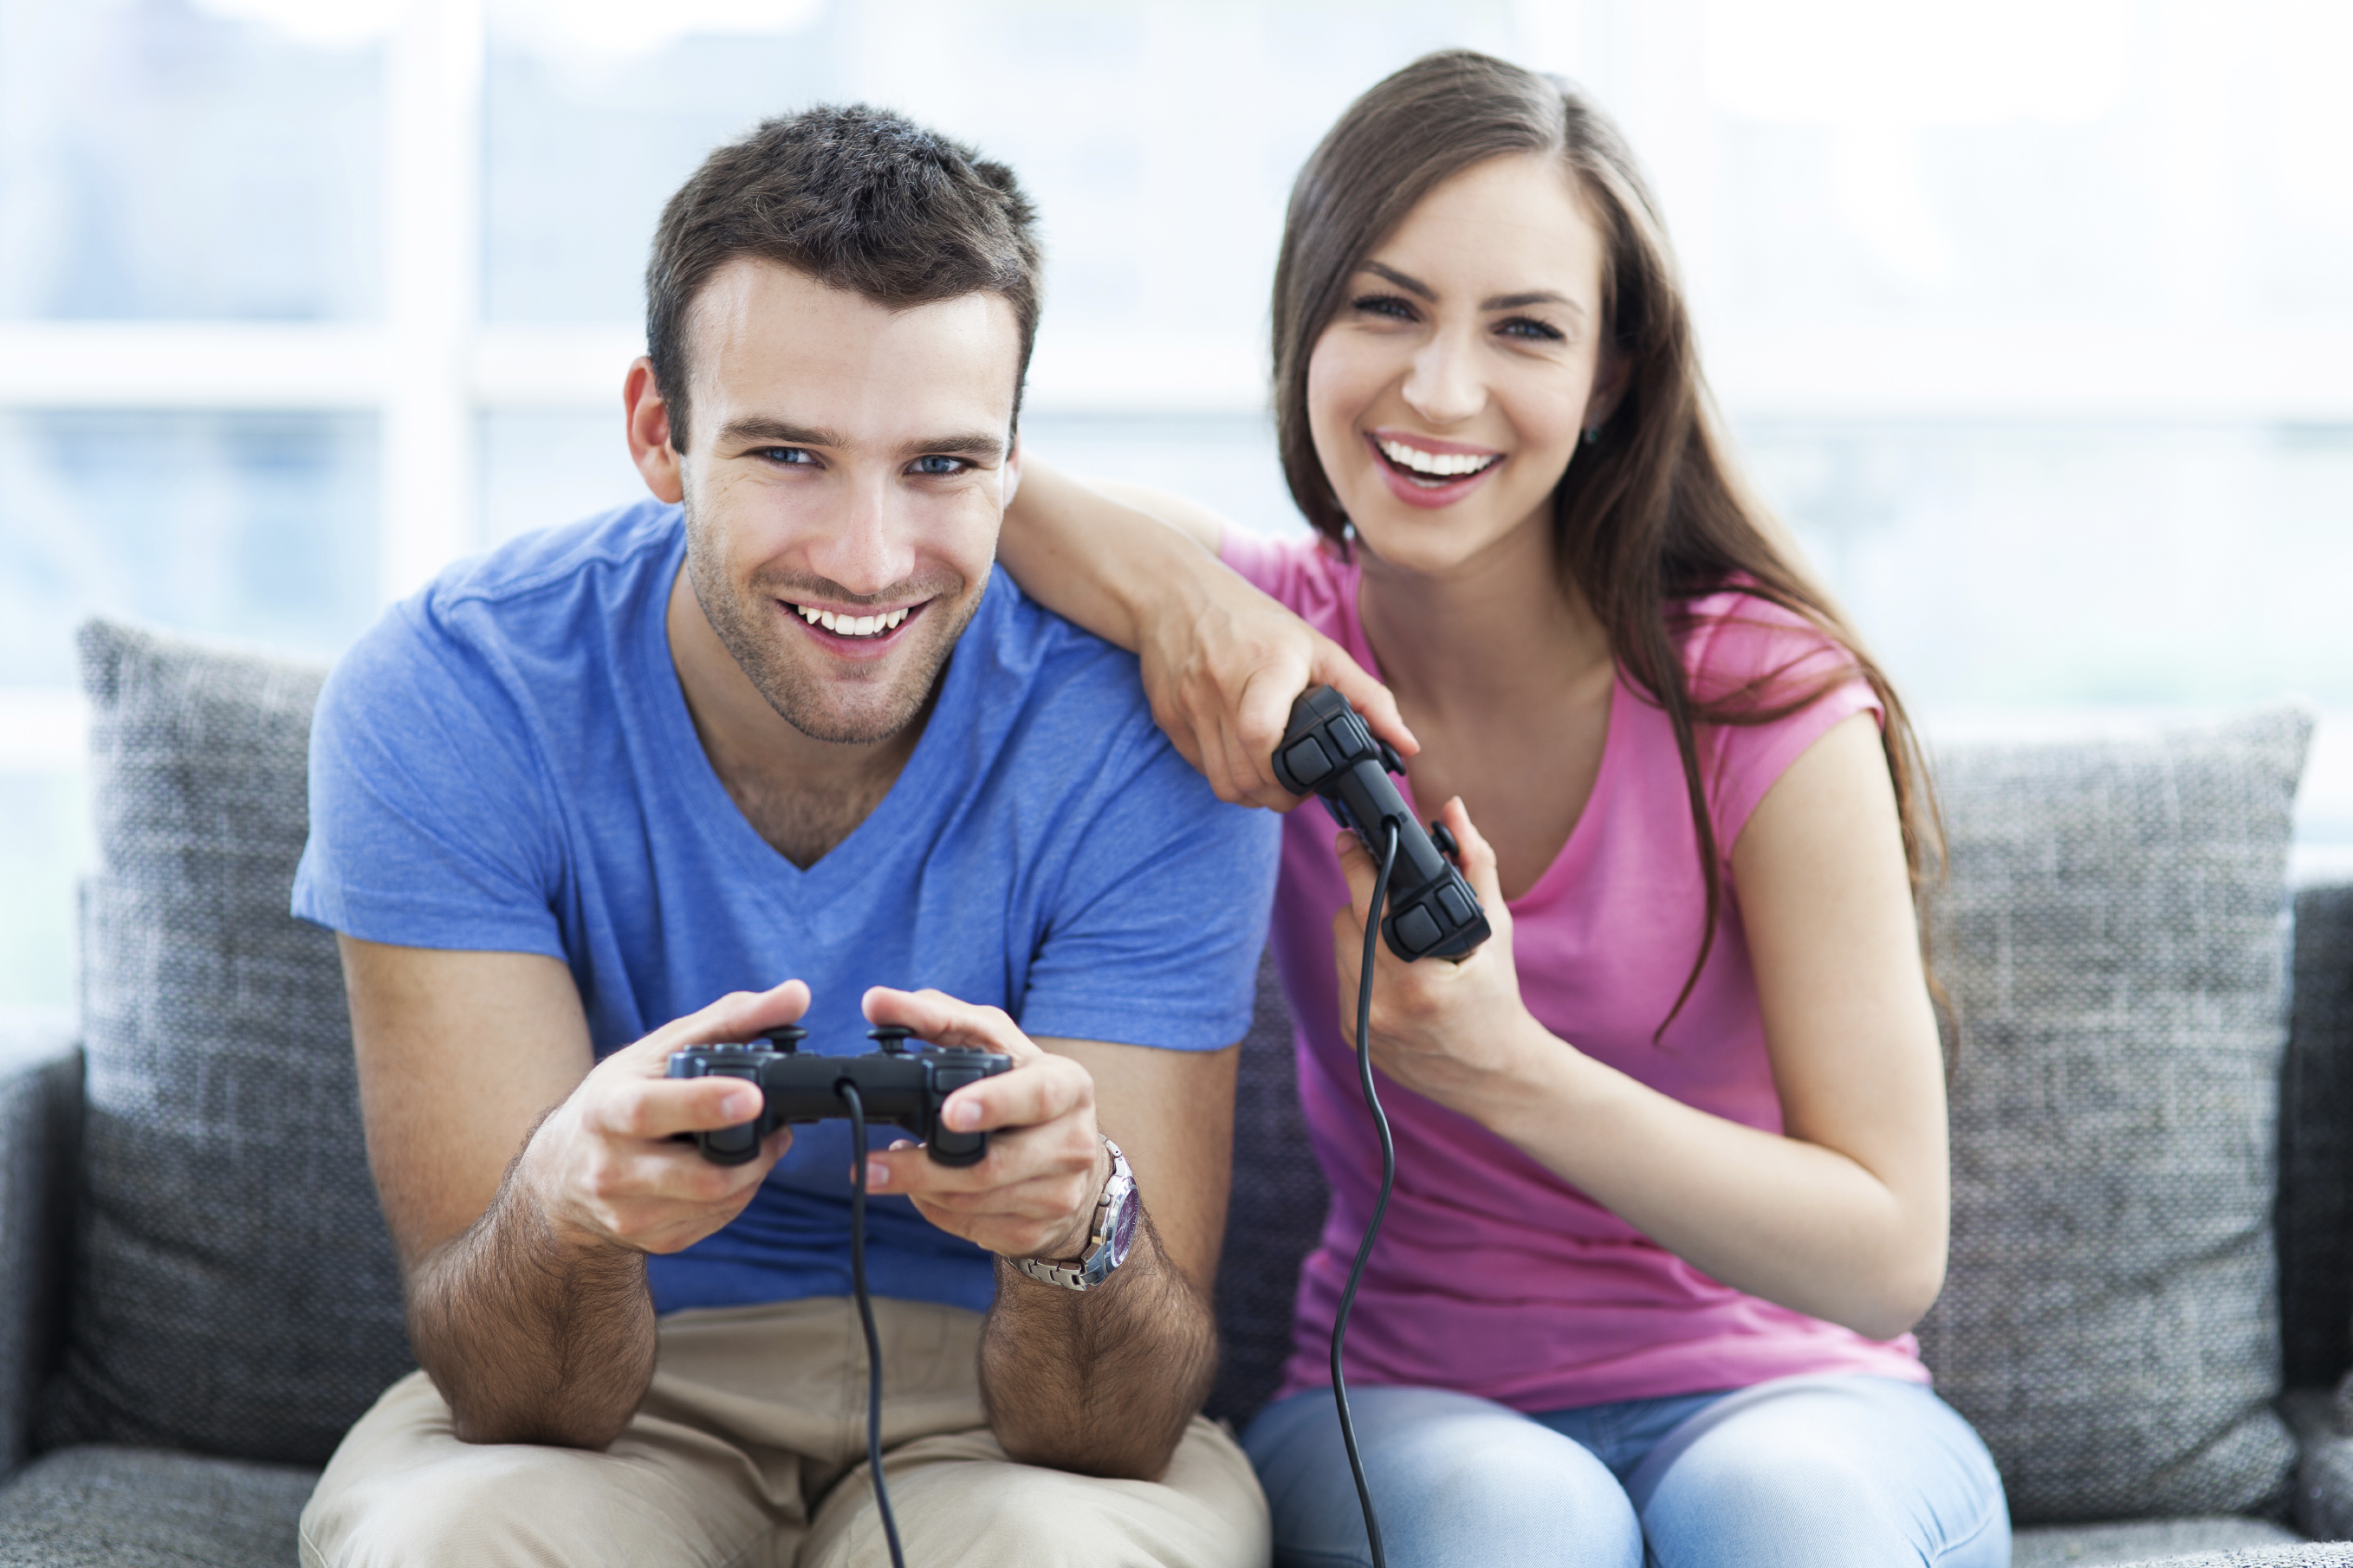 Get paid to play video games - Becoming a video game tester ...